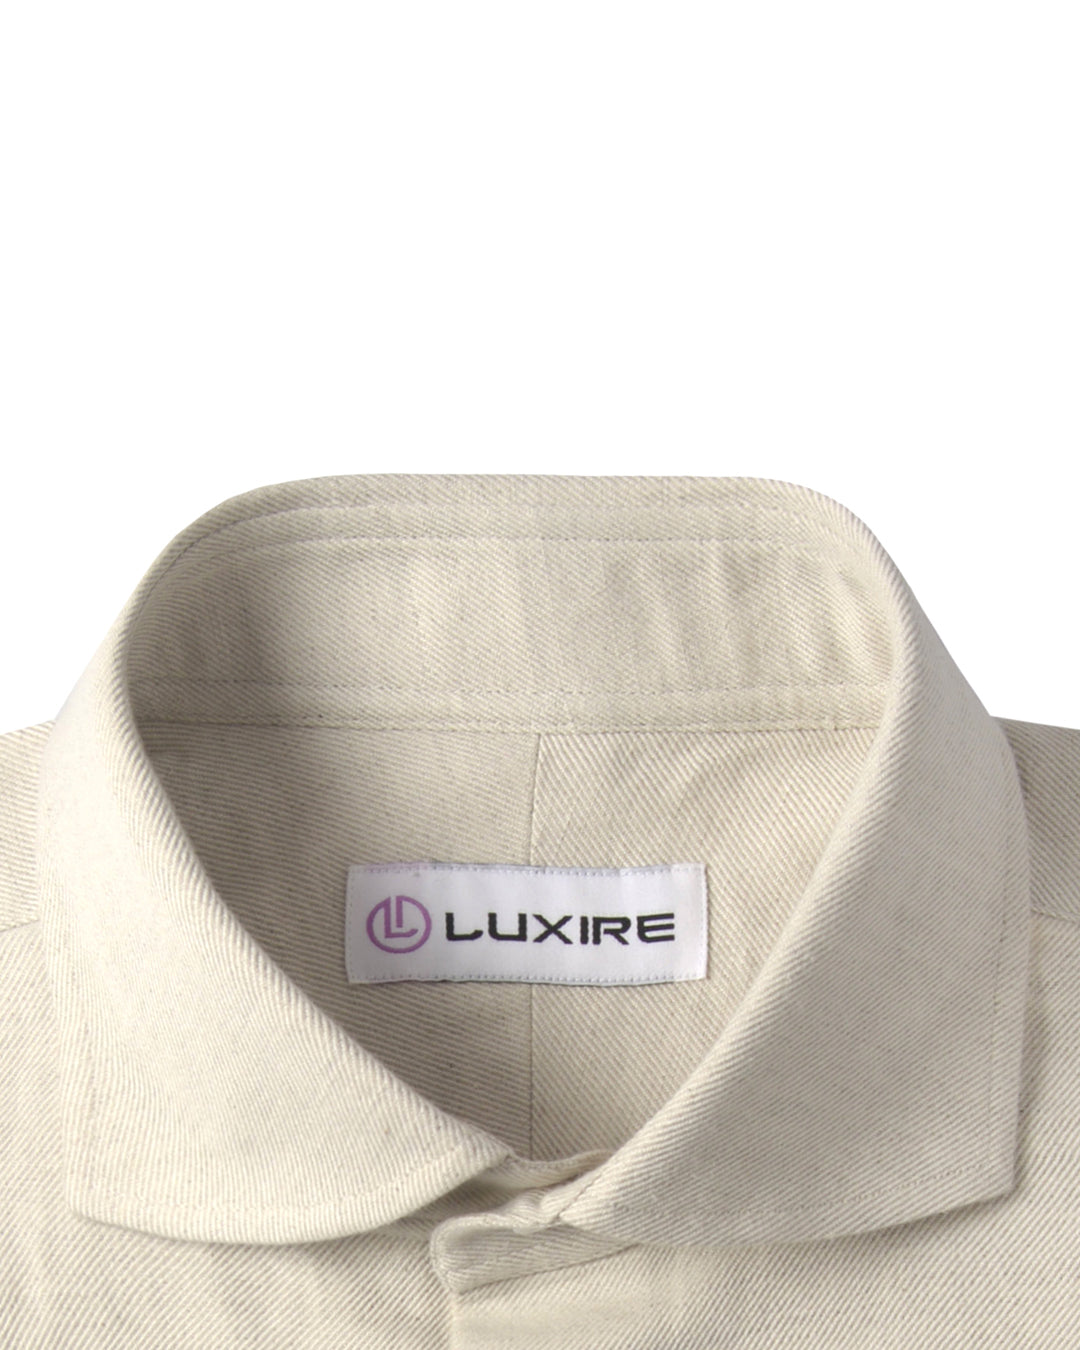 Collar of the custom linen shirt for men in cream twill by Luxire Clothing